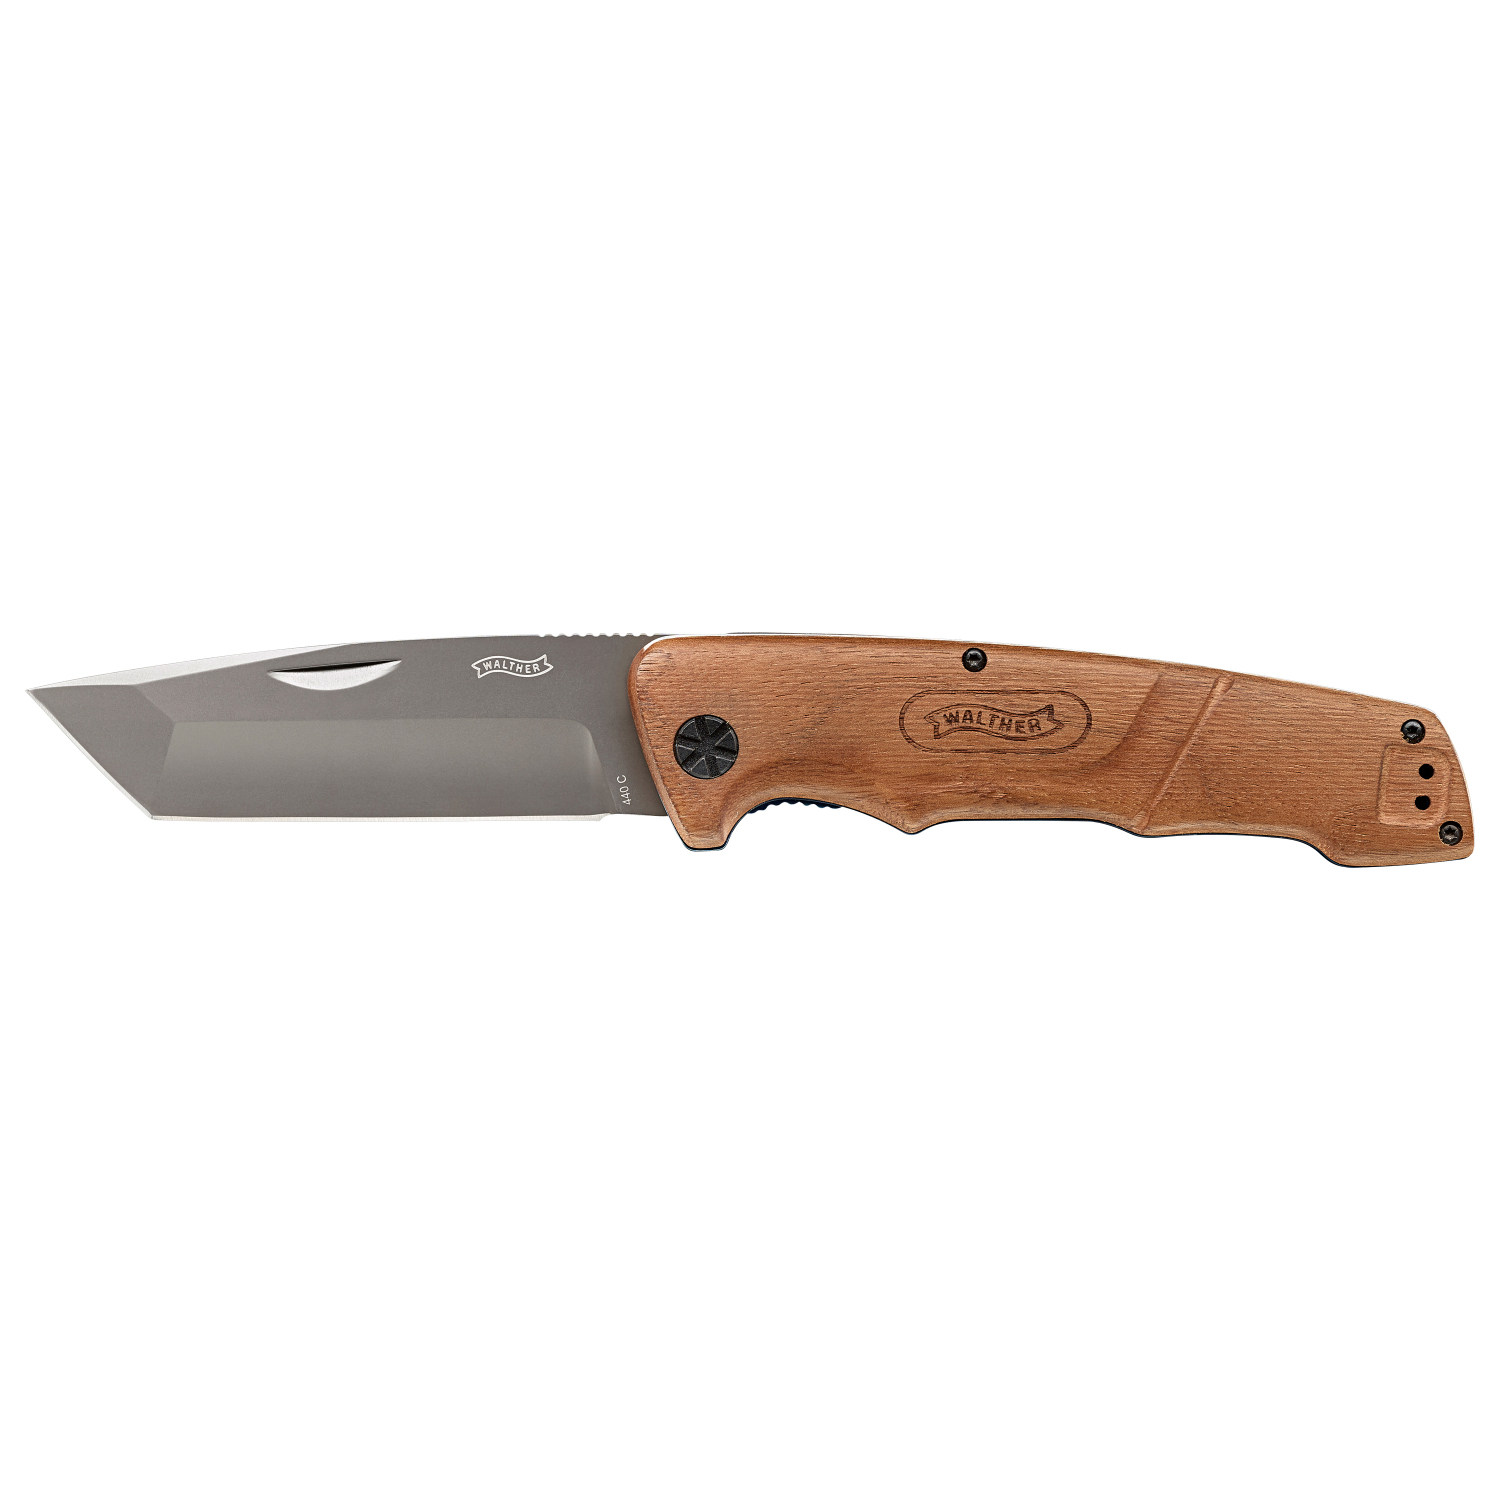 Walther Walther Blue Wood Knife 4 - Outdoormesser 